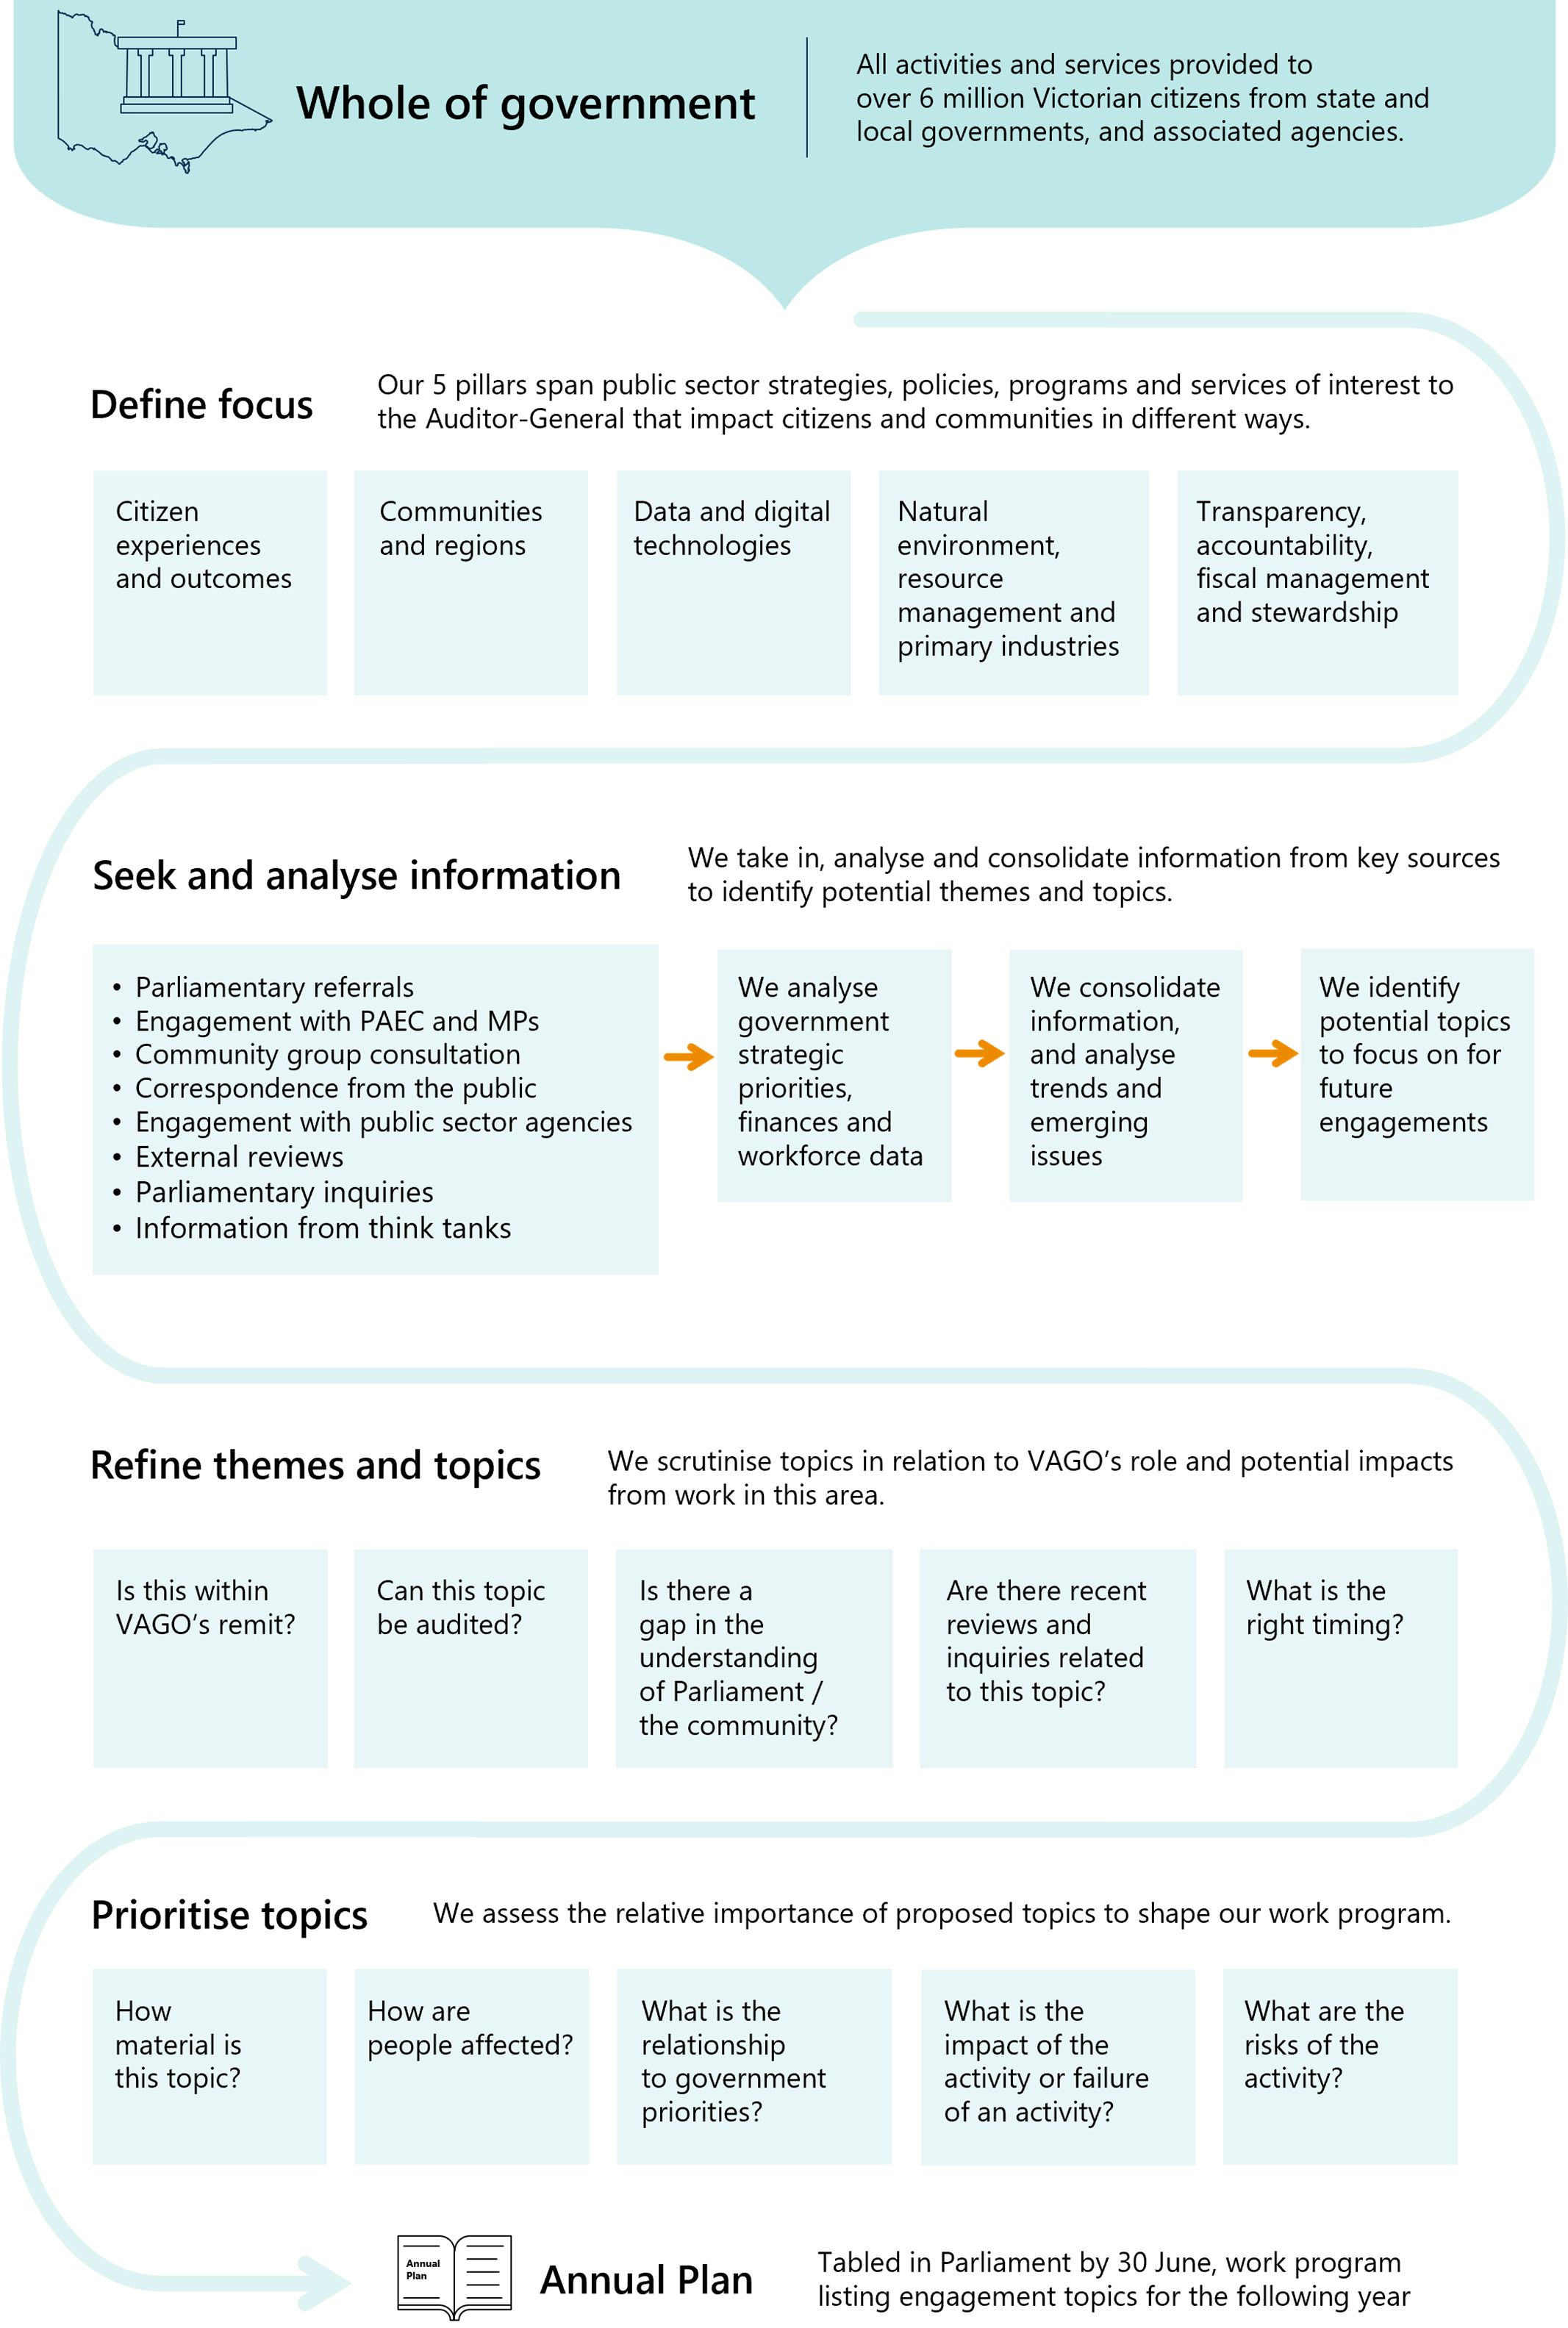 This is an infographic of our planning framework. It covers the whole of government including all activities and services provided to over 6 million Victorian citizens from state and local governments, and associated agencies. The first step is to define focus. Our 5 pillars span public sector strategies, policies, programs and services of interest to the Auditor-General that impact citizens and communities in different ways. They are: 1) citizen experiences and outcomes, 2) communities and regions, 3) data and digital technologies, 4) natural environment, resource management and primary industries, and 5) transparency, accountability, fiscal management and stewardship. The second step is to seek and analyse information. We take in, analyse and consolidate information from key sources to identify potential themes and topics. This includes parliamentary referrals, engagement with PAEC and MPs, community group consultation, correspondence from the public, engagement with public sector agencies, external reviews, parliamentary inquiries, and information from think tanks. We analyse government strategic priorities, finances and workforce data. We consolidate information, and analyse trends and emerging issues. We identify potential topics to focus on for future engagements. The third step is to refine themes and topics. We scrutinise topics in relation to VAGO’s role and potential impacts from work in this area. We consider, is this within VAGO’s remit? Can this topic be audited? Is there a gap in the understanding of Parliament / the community? Are there recent reviews and inquiries related to the topic? What is the right timing? The fourth step is to prioritise topics. We assess the relative importance of proposed topics to shape our work program. We consider, how material is this topic? How are people affected? What is the relationship to government priorities? What is the impact of the activity or failure of an activity? What are the risks of the activity? This results in our Annual Plan, which is tabled in Parliament by 30 June. It is a work program listing engagement topics for the following year.